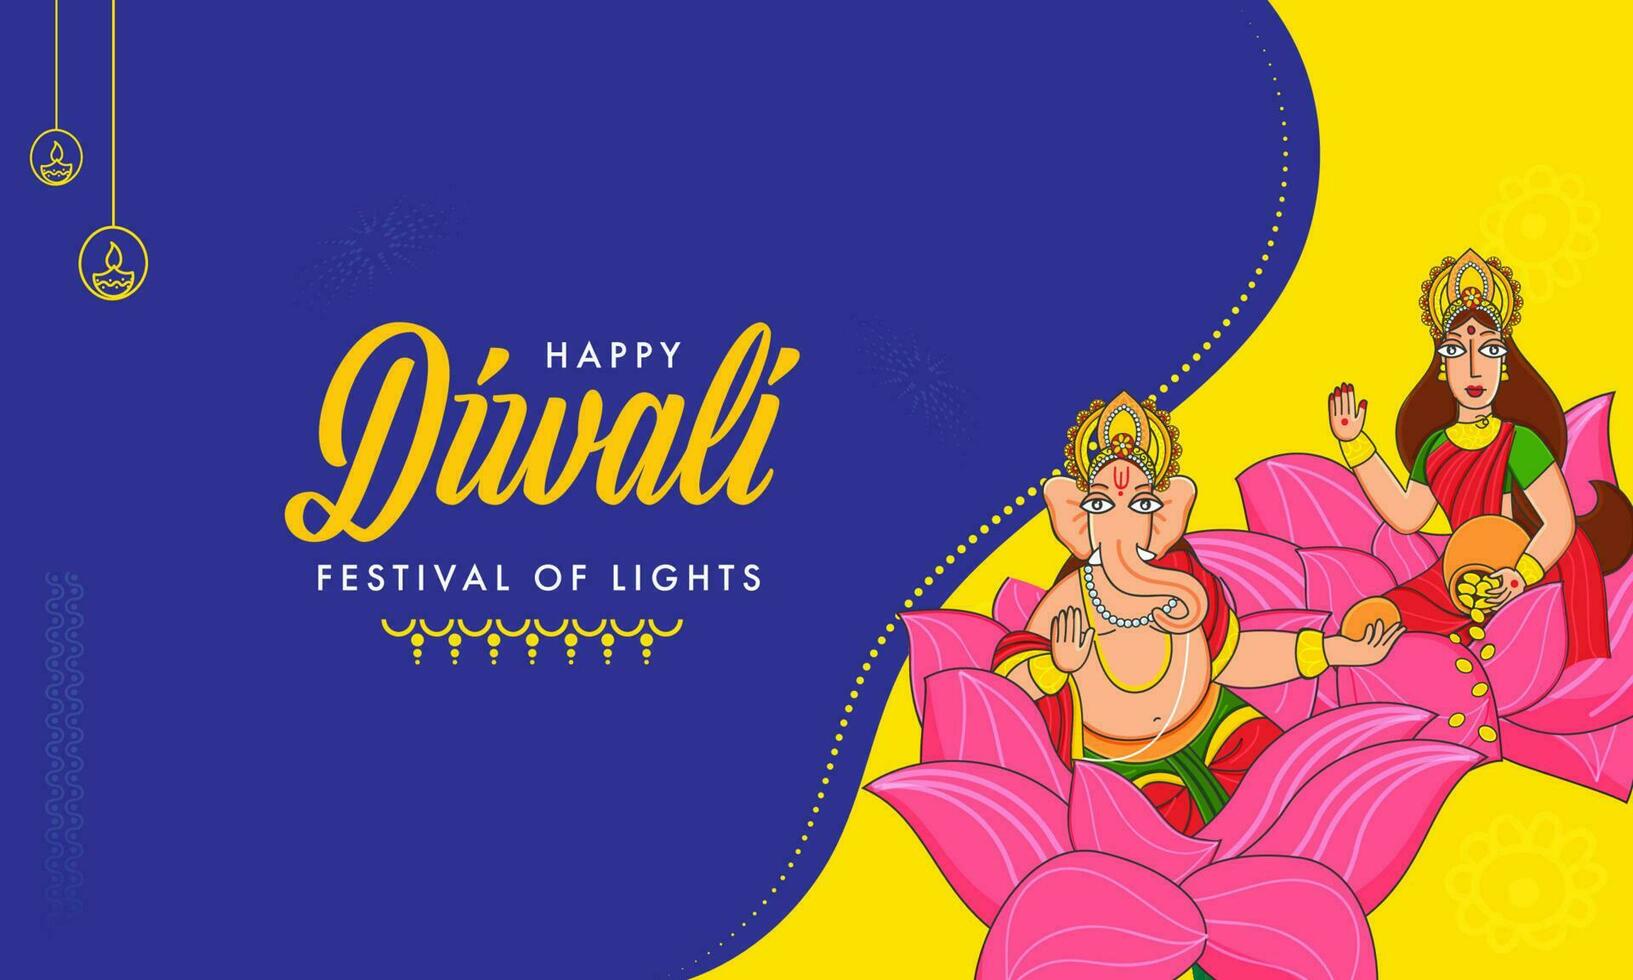 Happy Diwali Celebration Concept With Lord Ganesha And Goddess Lakshmi Statue On Yellow And Blue Background. vector